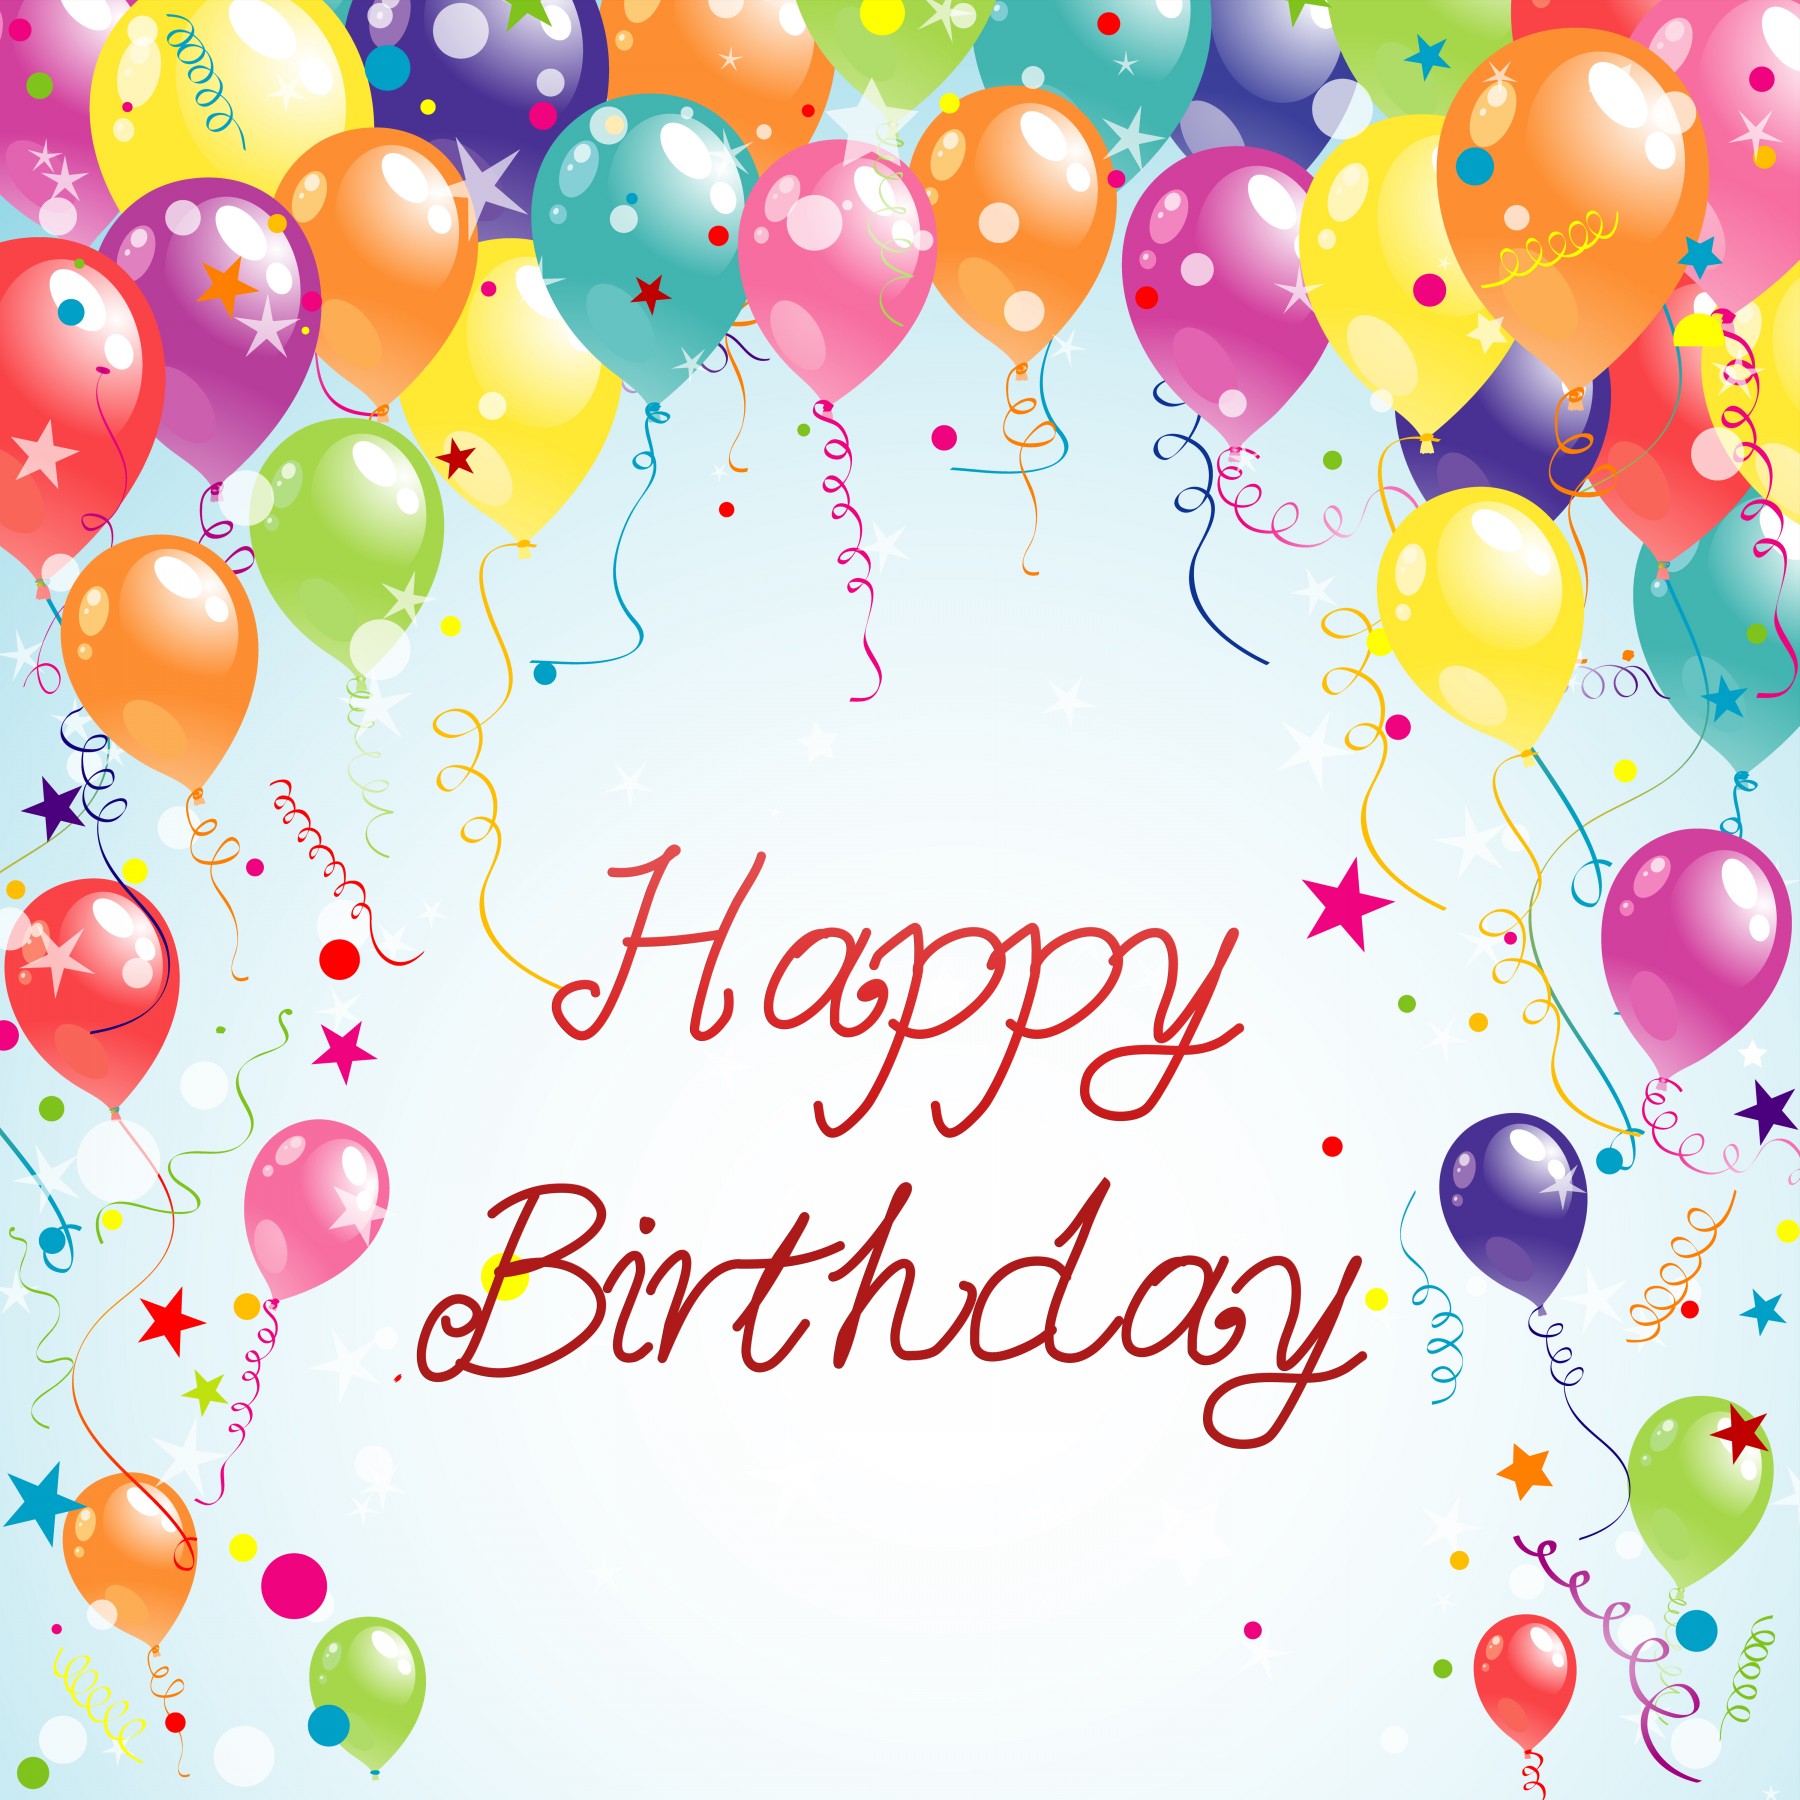 Images of beautiful birthday cards | danasrhj.top